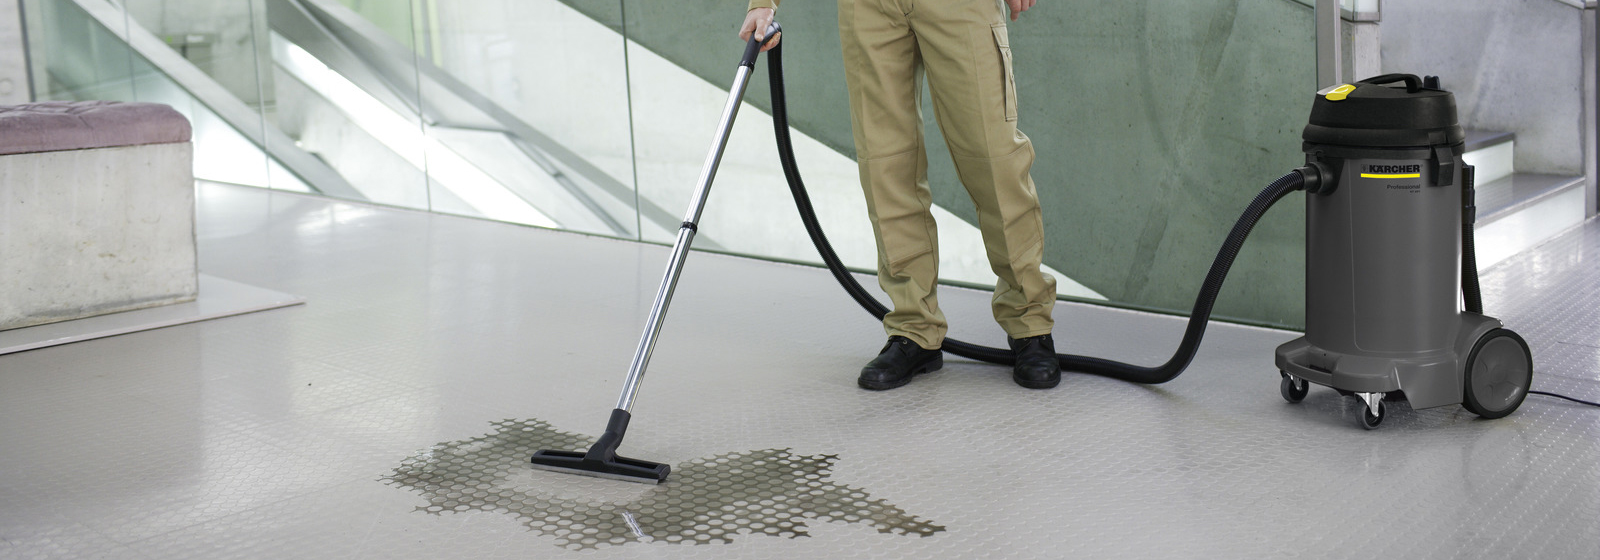 Kärcher Wet and Dry Vacuum Cleaners - Standard class